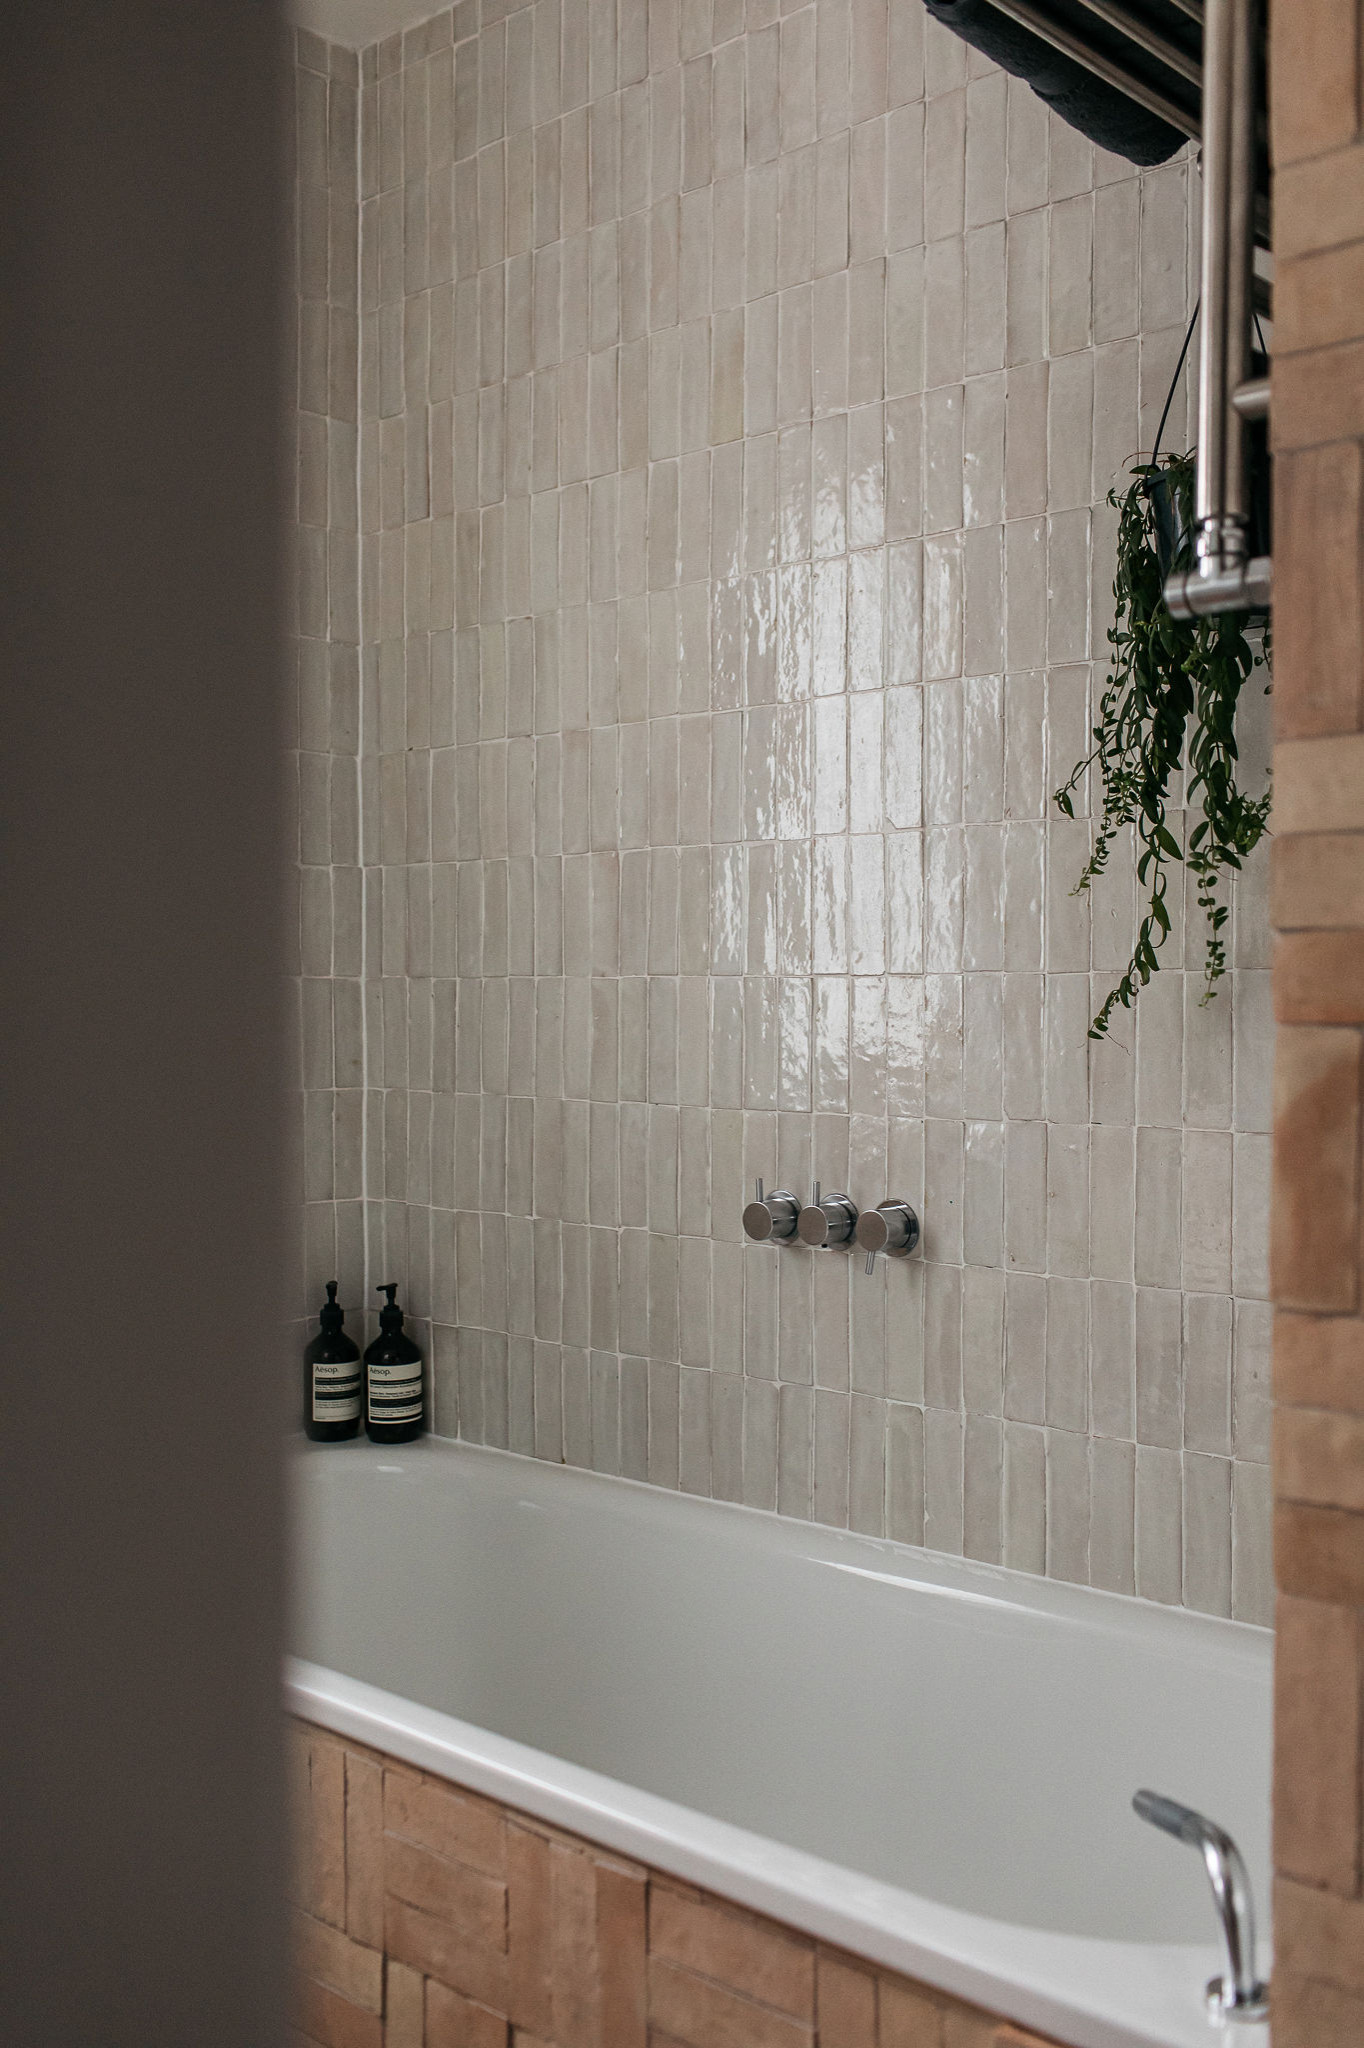 Zellige tiles used as a bath and shower surround